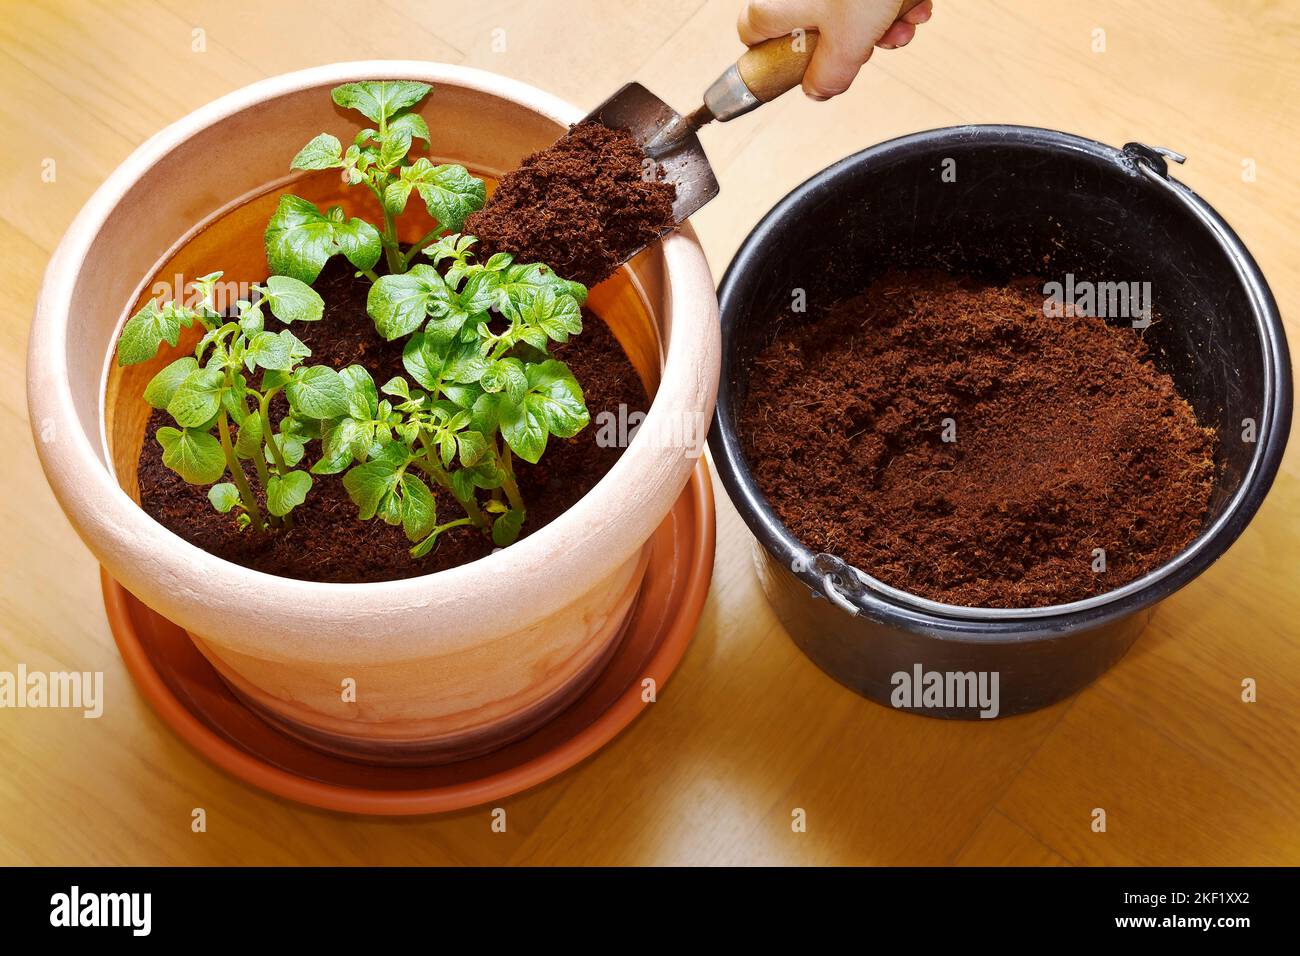 Photo series about growing potatoes in pots in containers: 4. When the potato plants have grown enough, fill up with another 4 inches (10 cm) of soil. Stock Photo